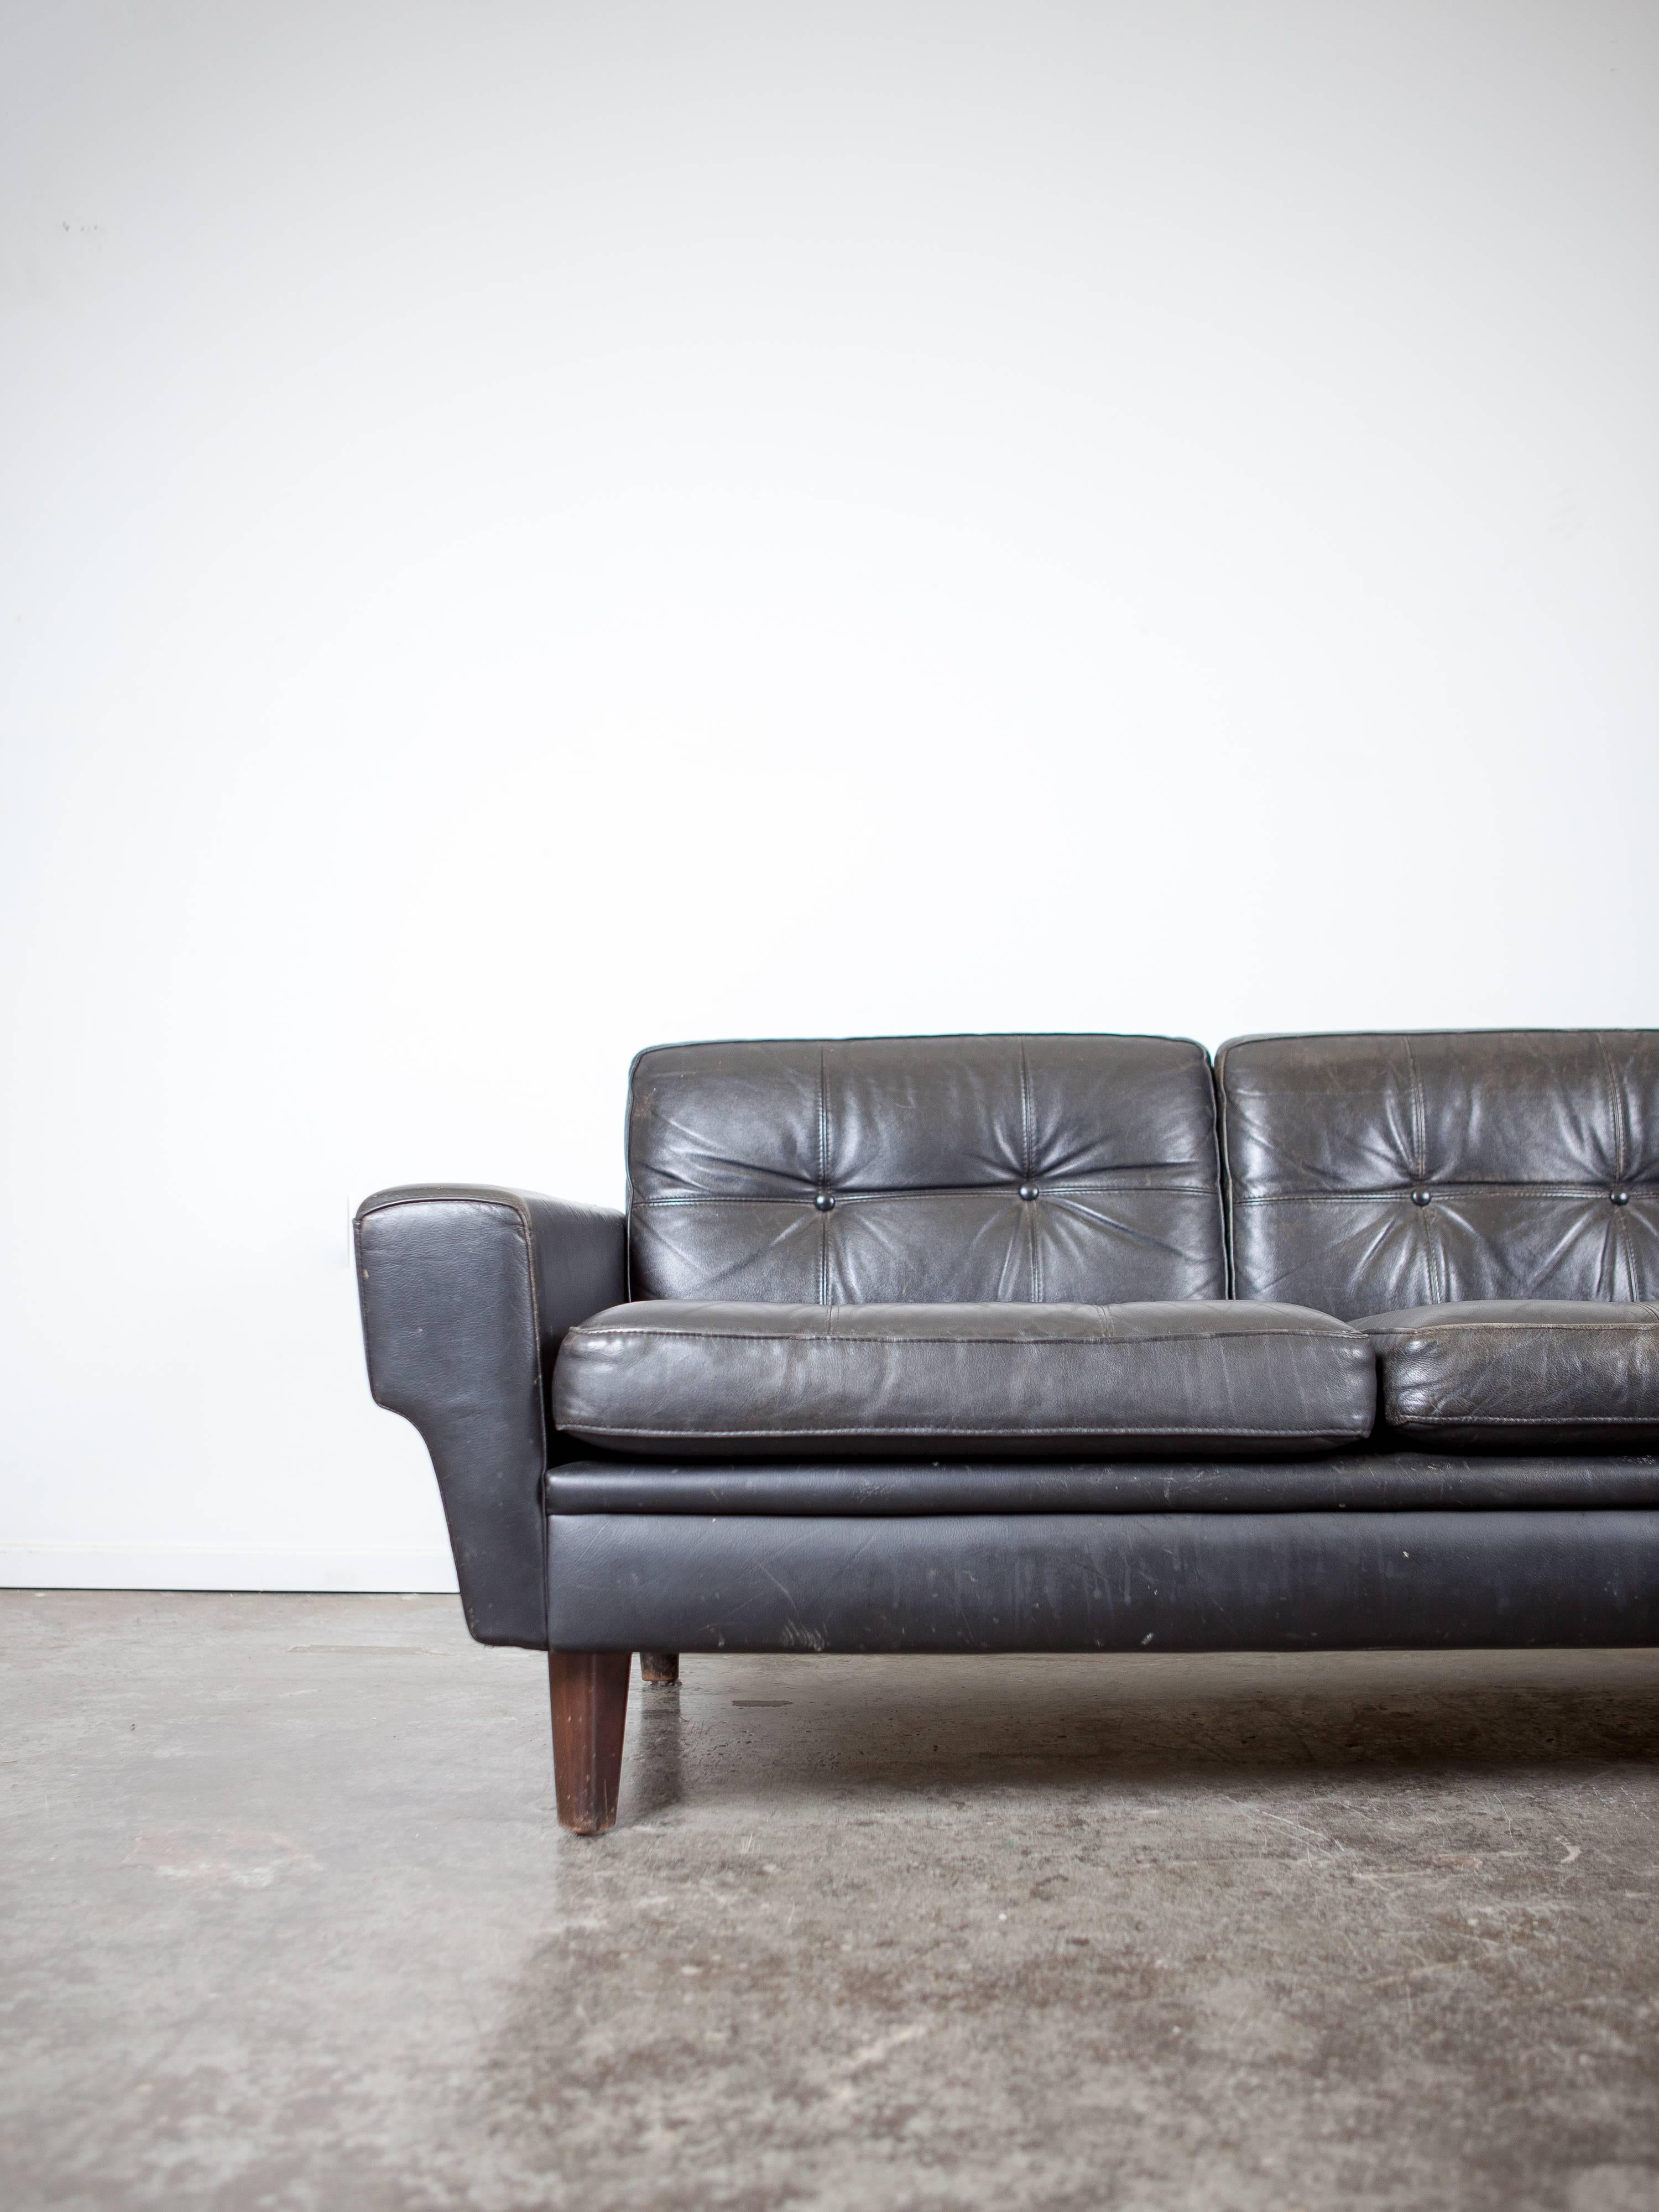 Classic Mid-Century Modern black leather sofa with button tufted cushions.